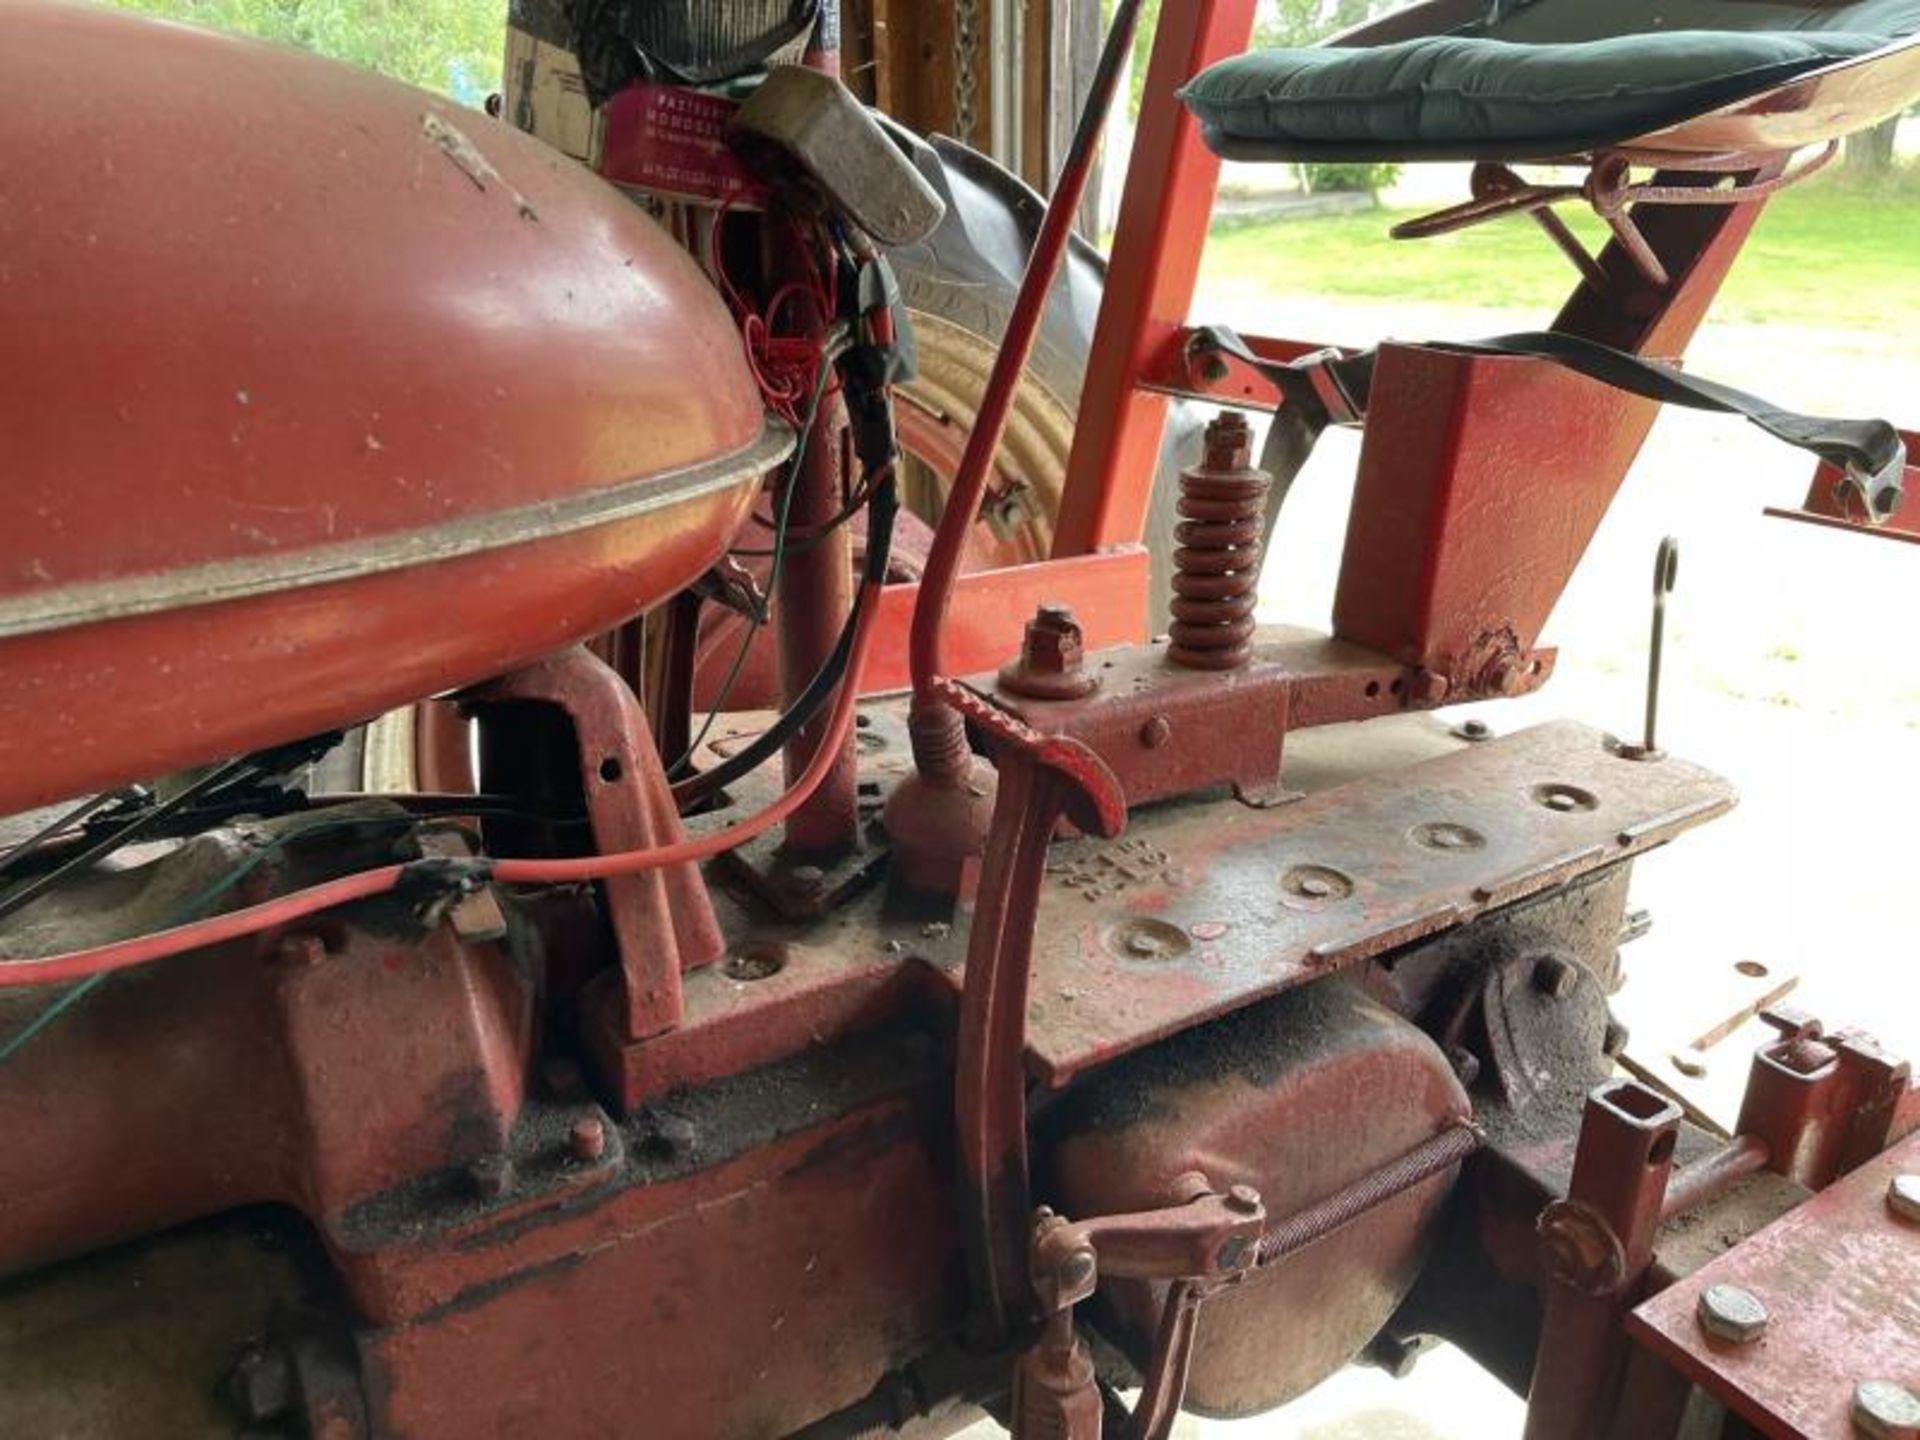 Farmall Tractor Believed To Be 1954, Row-CropFarmall Tractor Believed To Be 1954, Row-Crop - Image 12 of 35